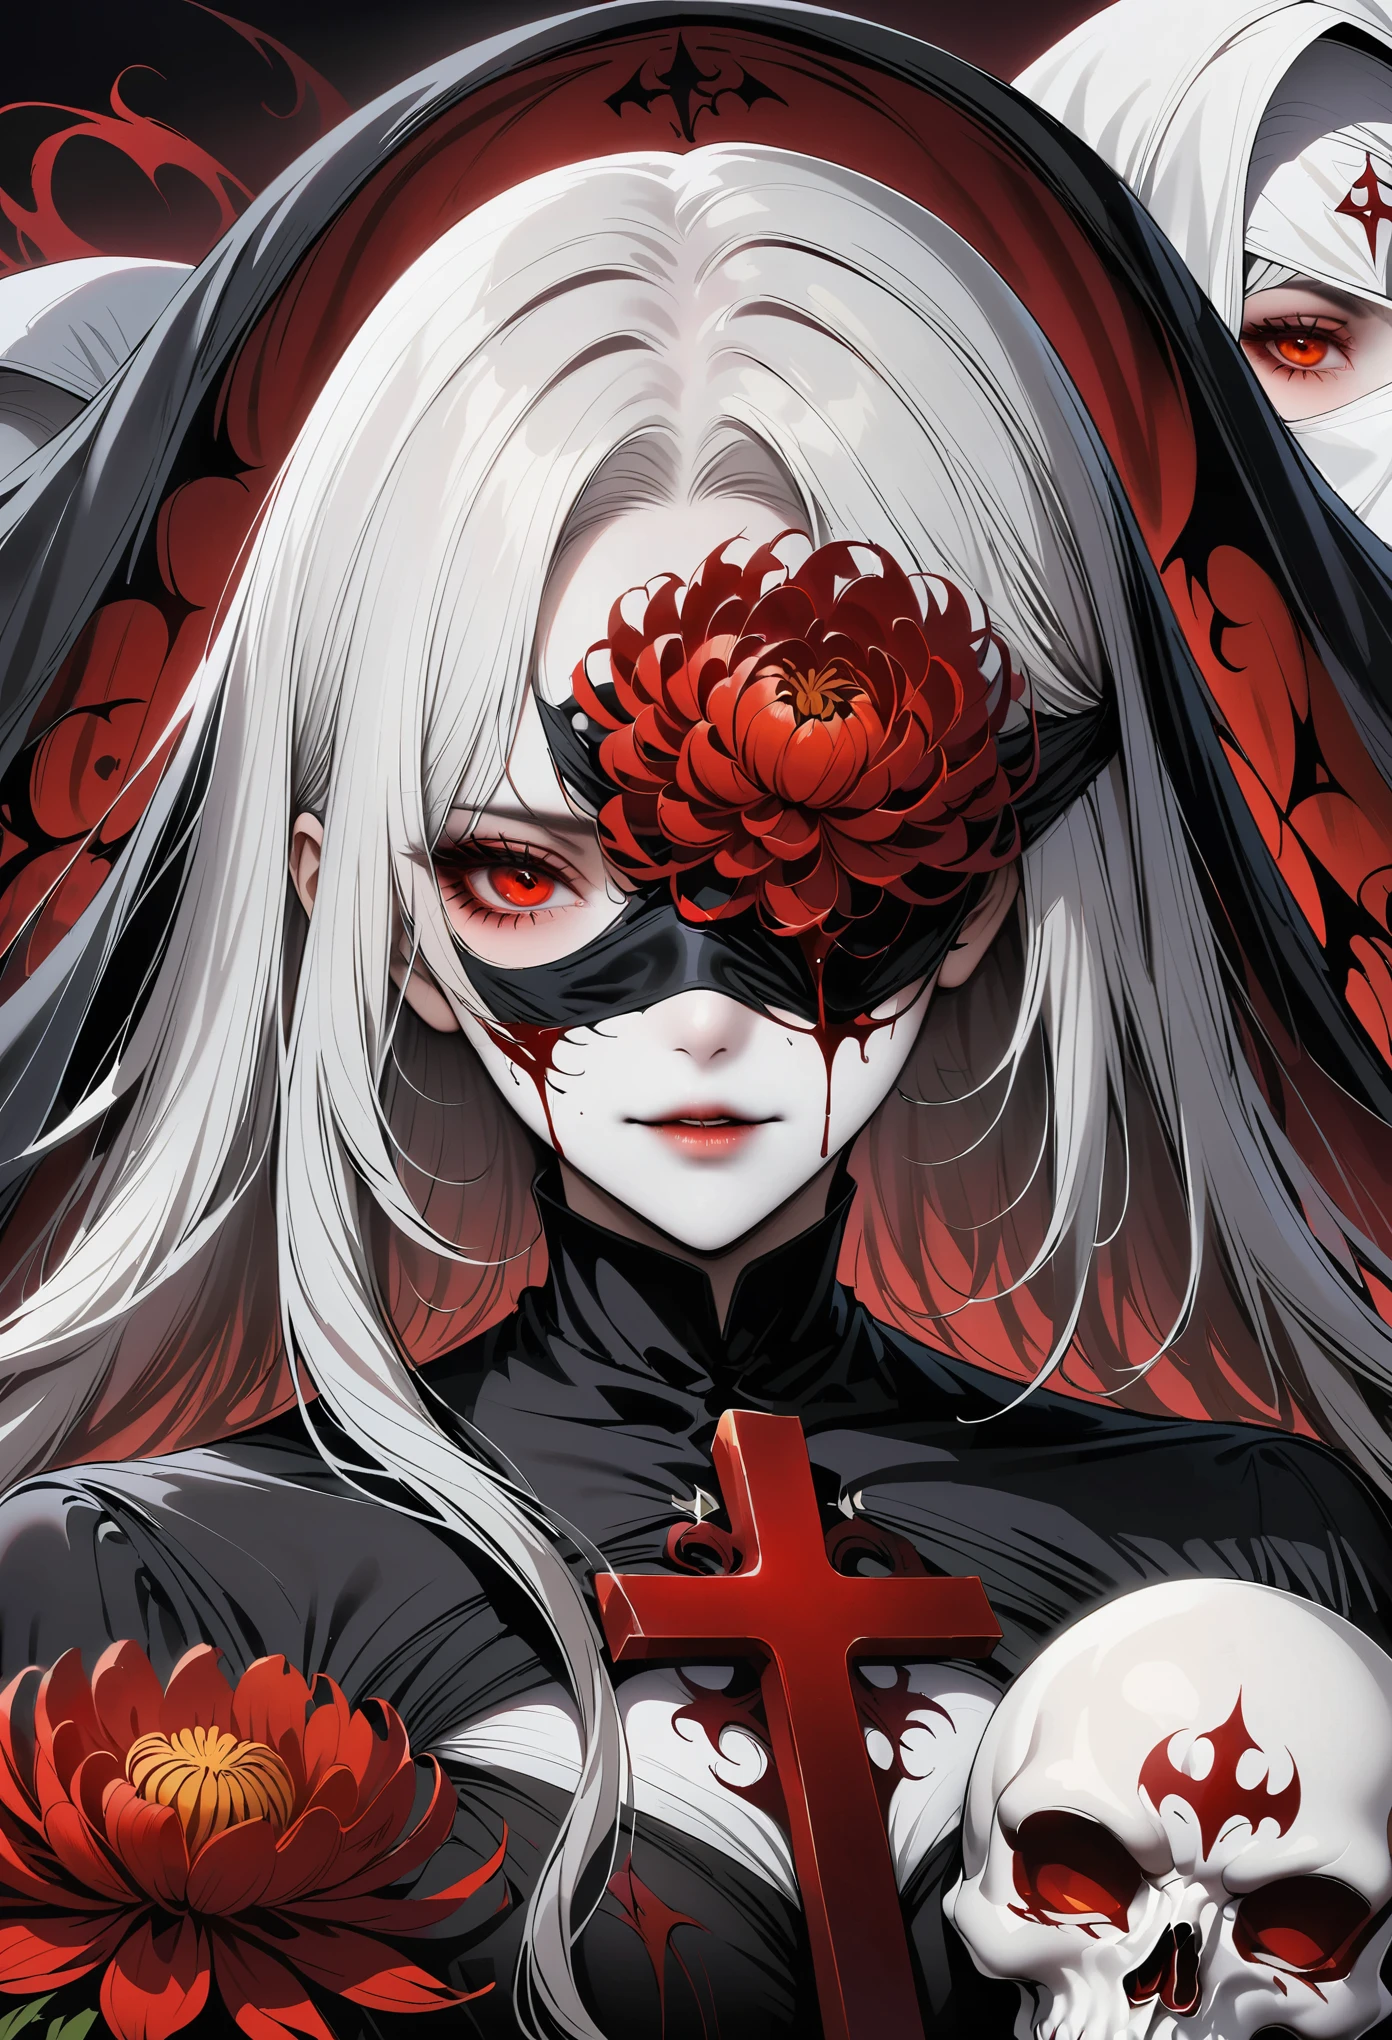 (best quality,4K,8K,high resolution,masterpiece:1.2),（（（Giant cross：1.37））），The nun and the skeleton godfather in the church，Nun costumes，Nun Characteristics，bloody,red lily,red chrysanthemum,flame,Light.